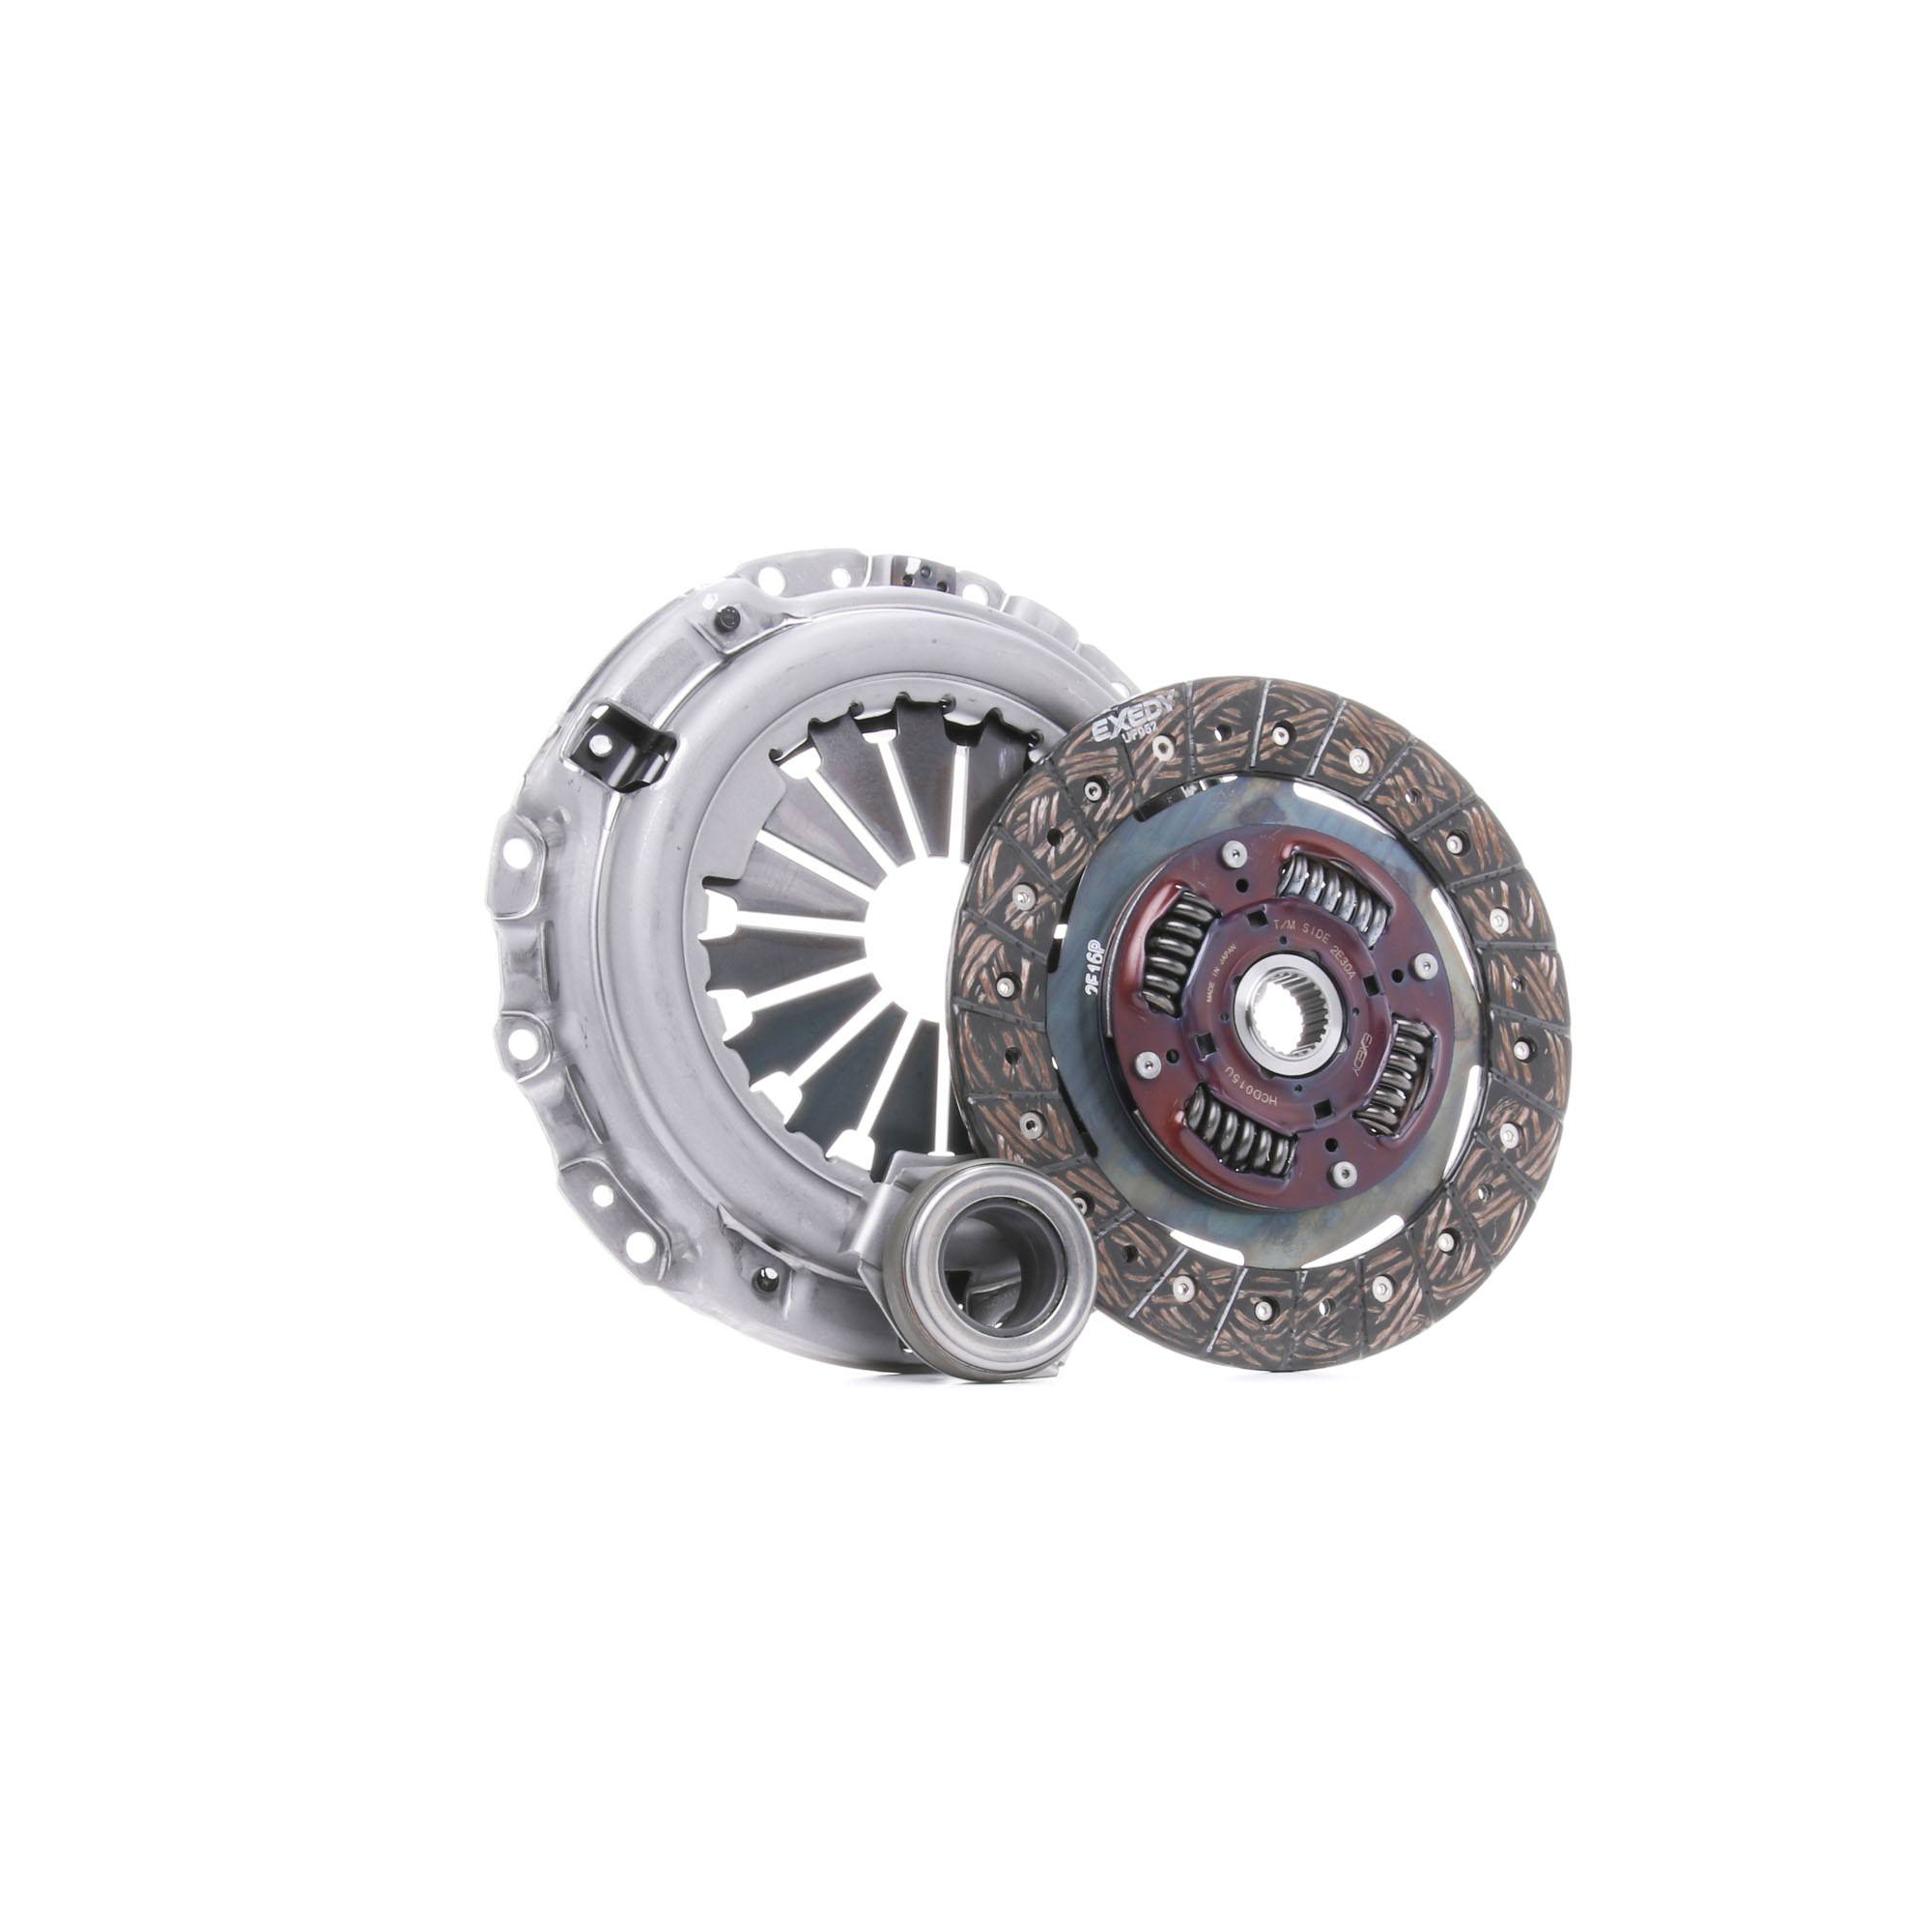 EXEDY HCK2021 Clutch kit SAAB experience and price